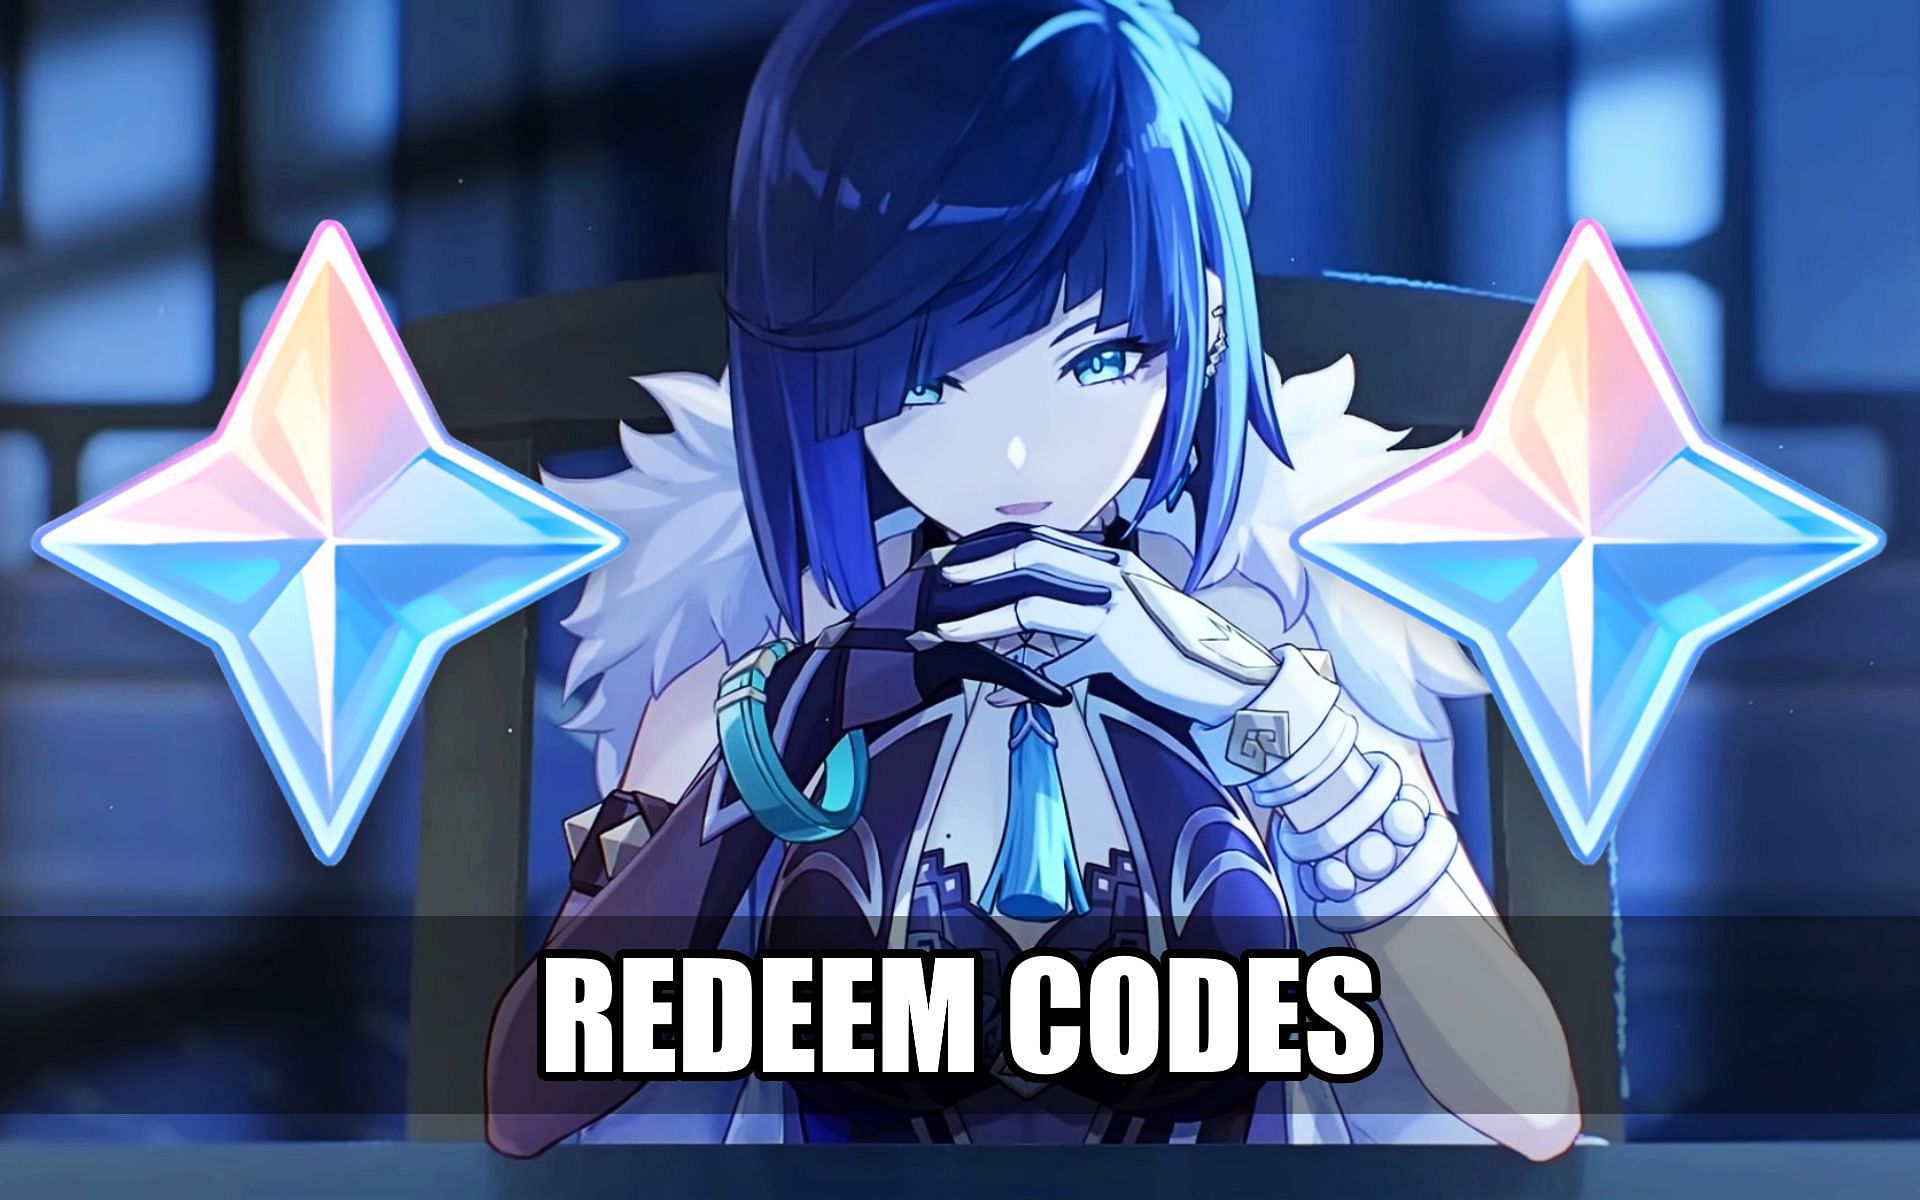 These codes should work throughout June 2022 (Image via miHoYo)